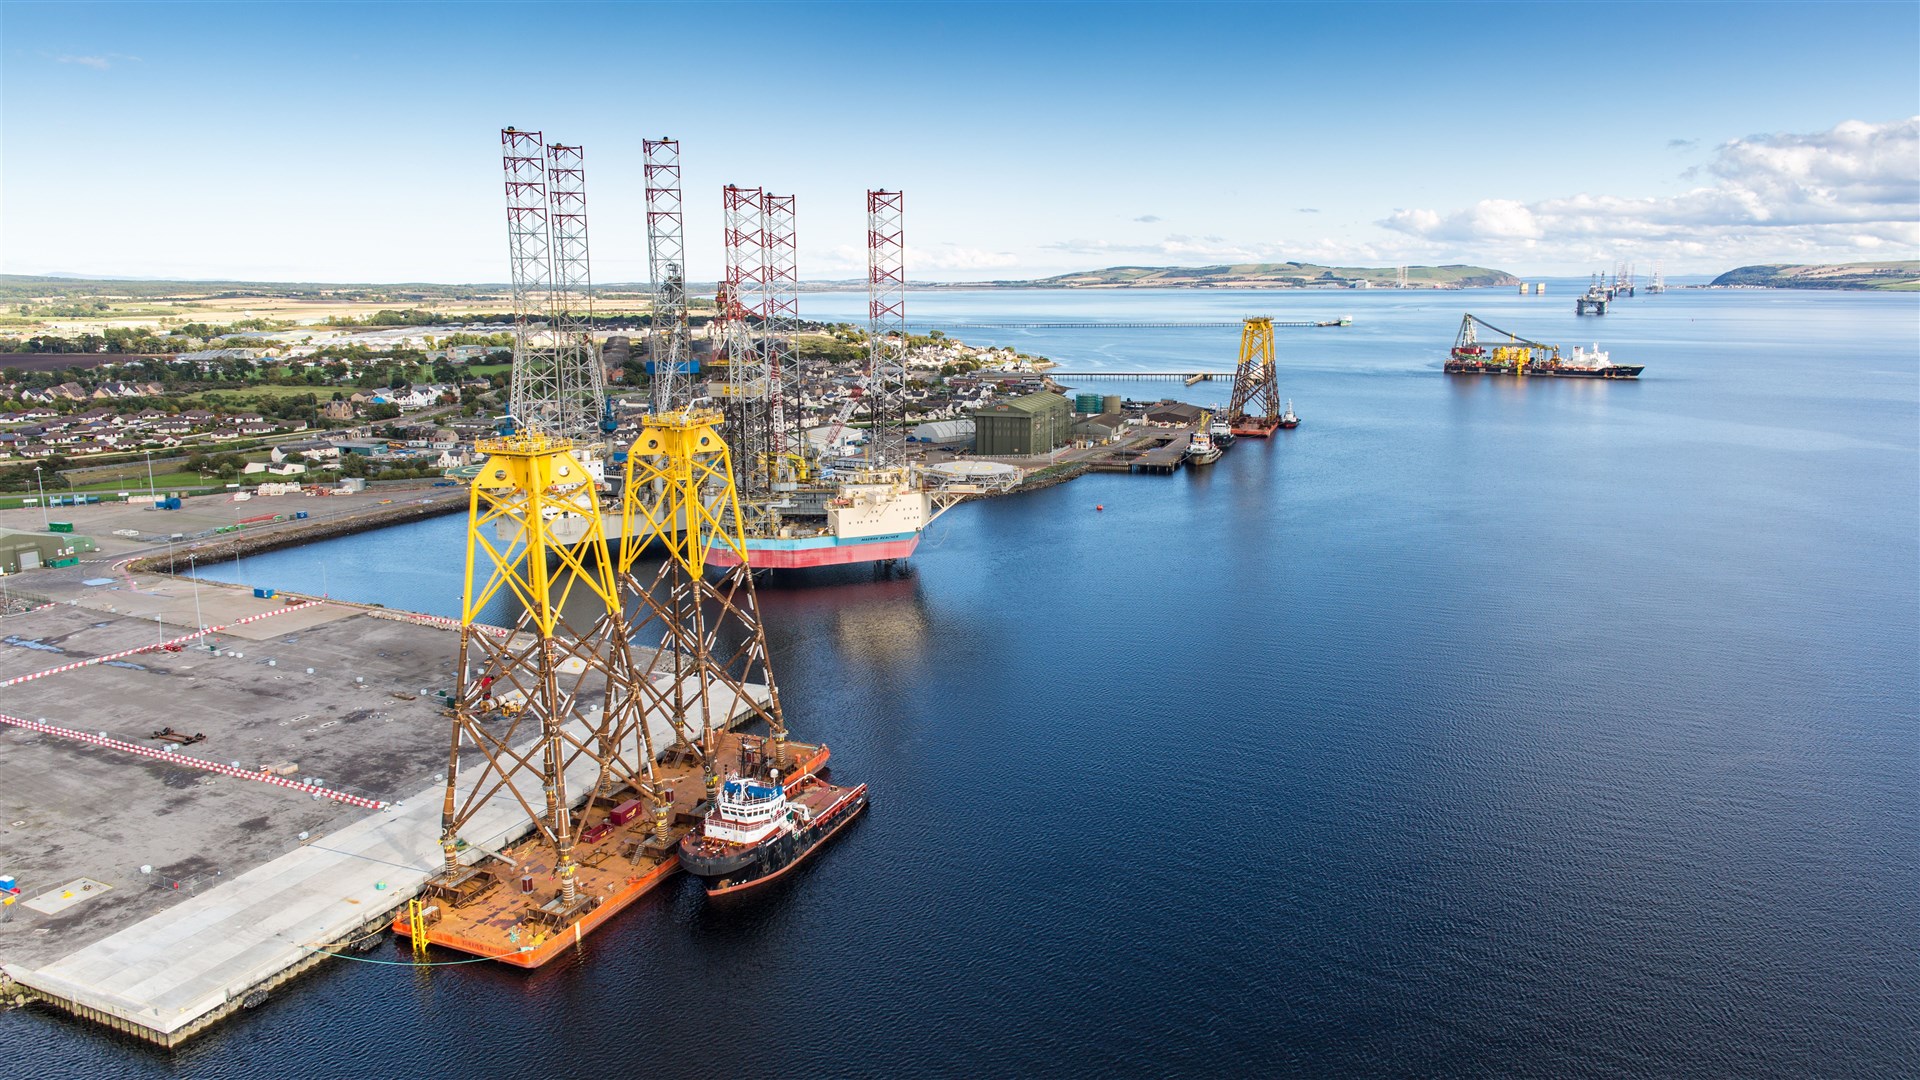 The Port of Cromarty Firth jas announced plans to create a green hyrdogen energy hub.